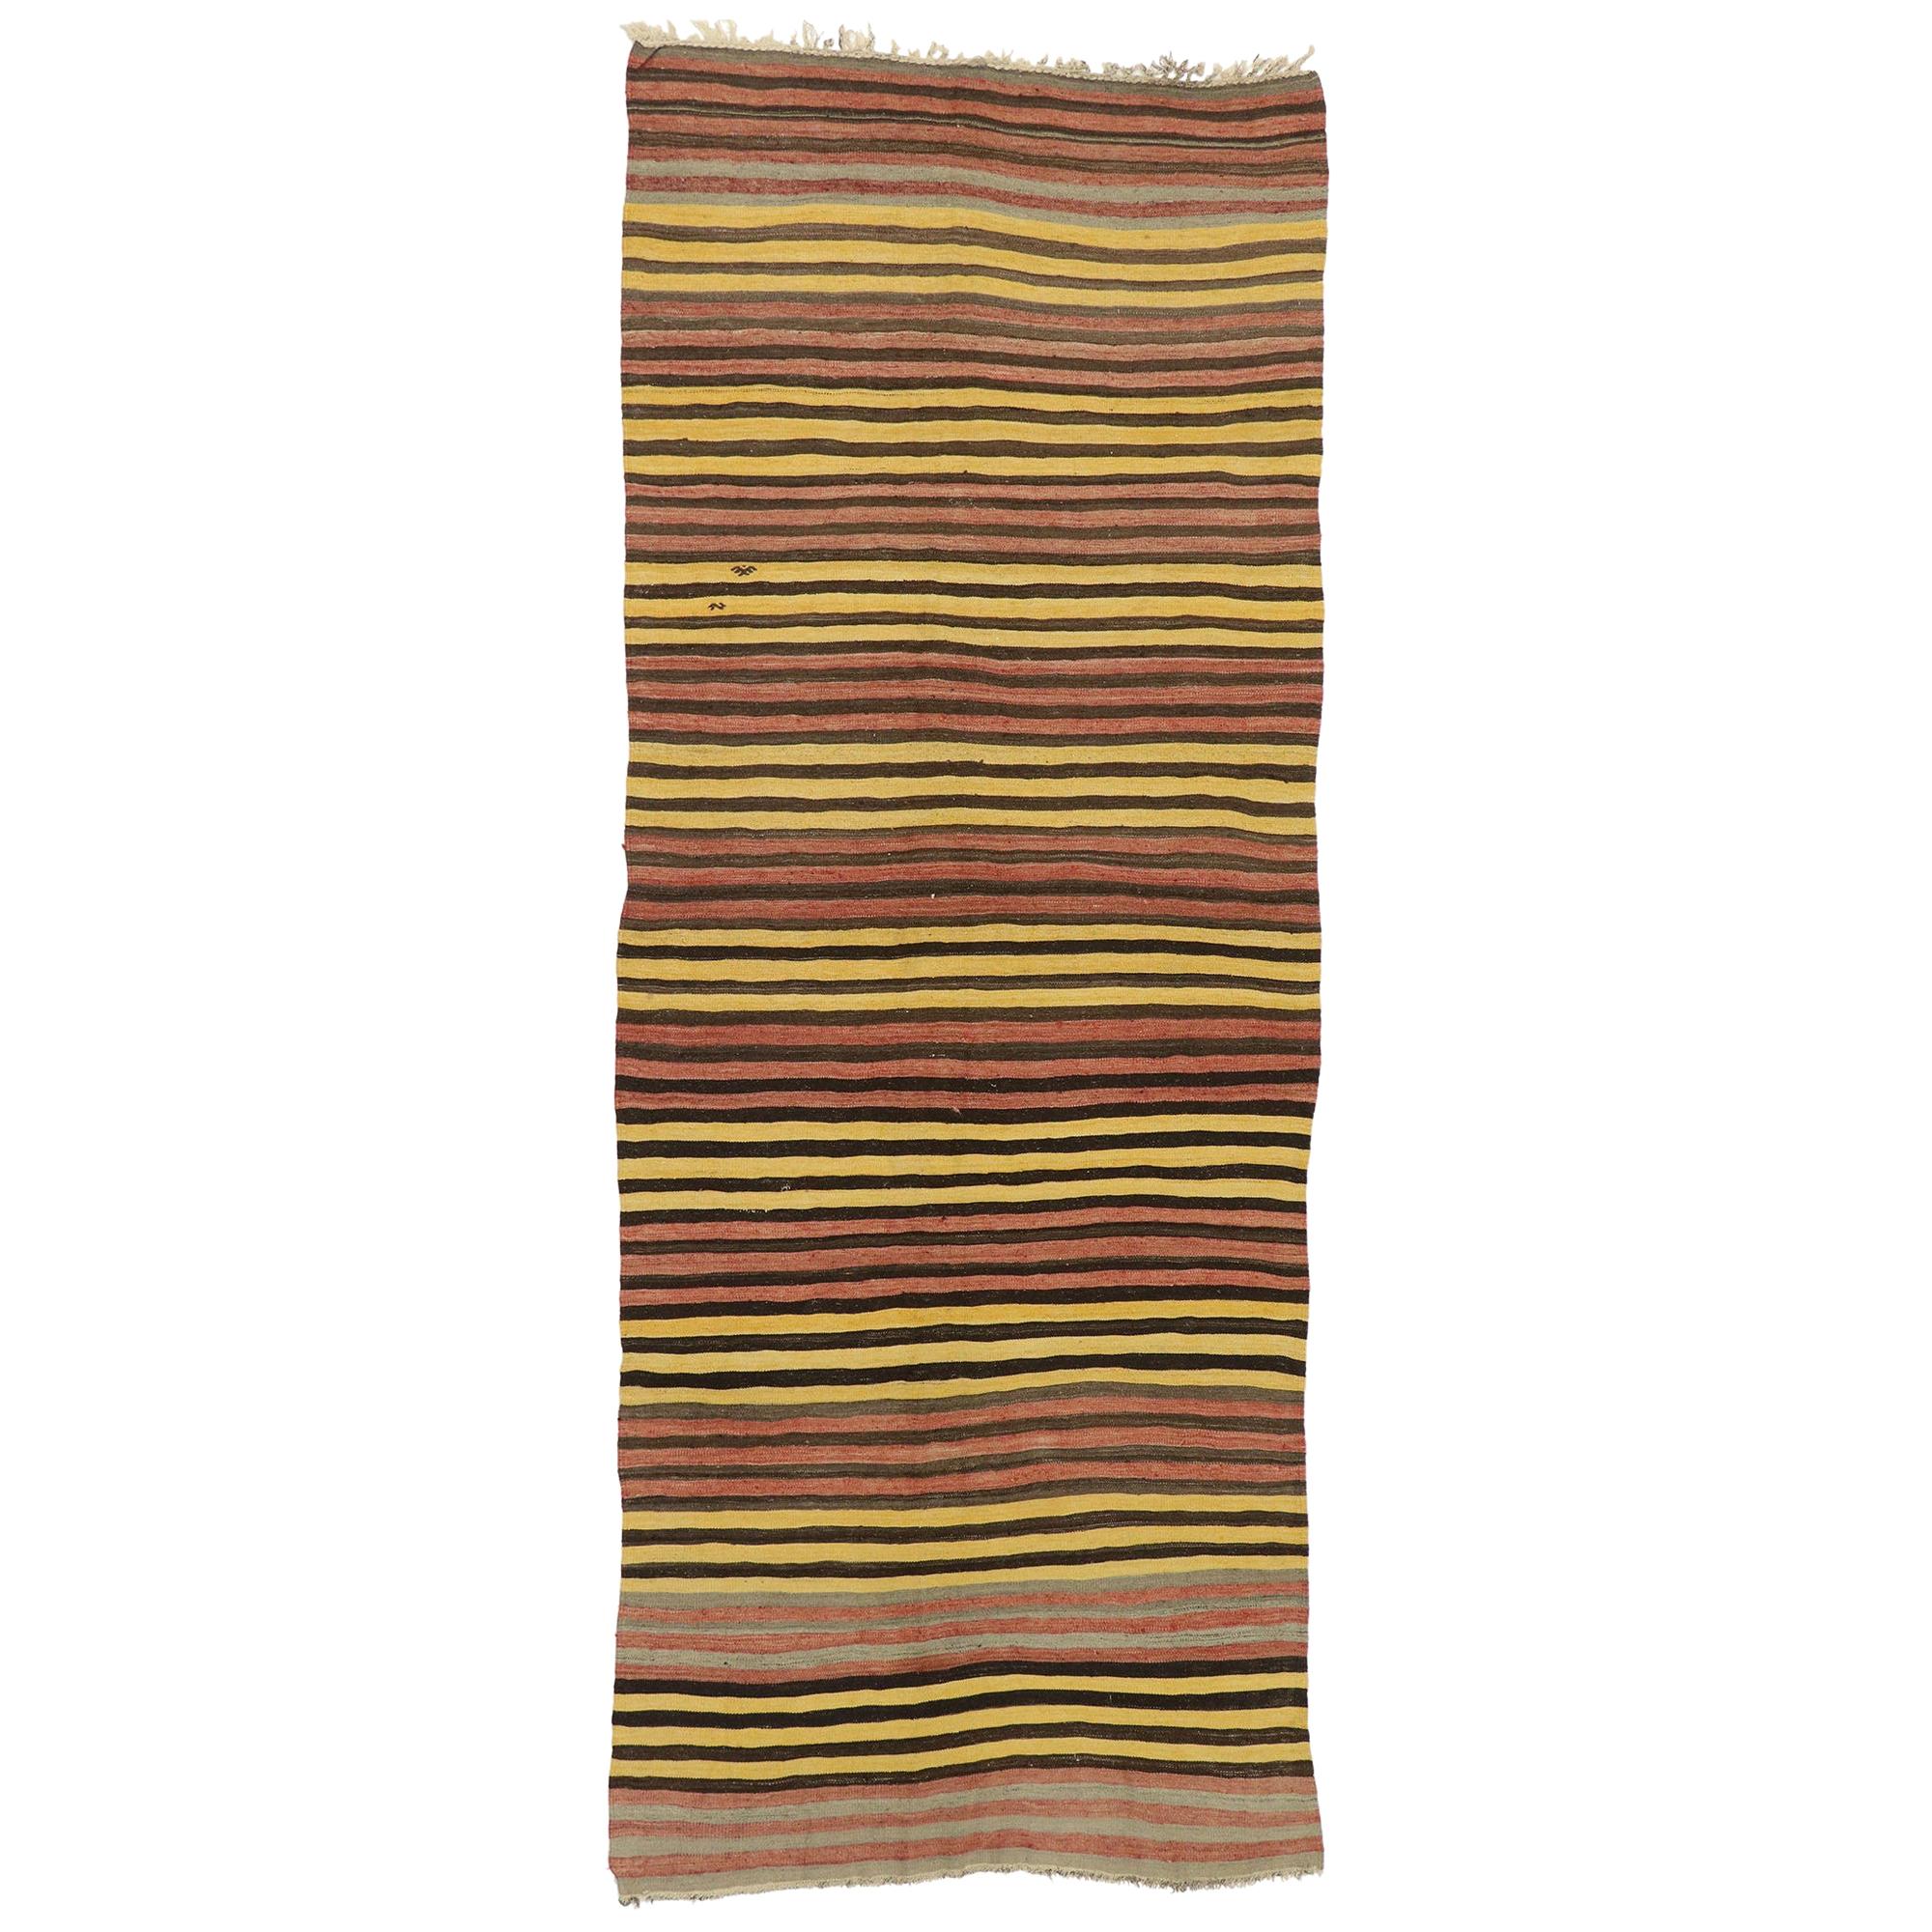 Vintage Turkish Striped Kilim Rug with Mid-Century Modern Style For Sale